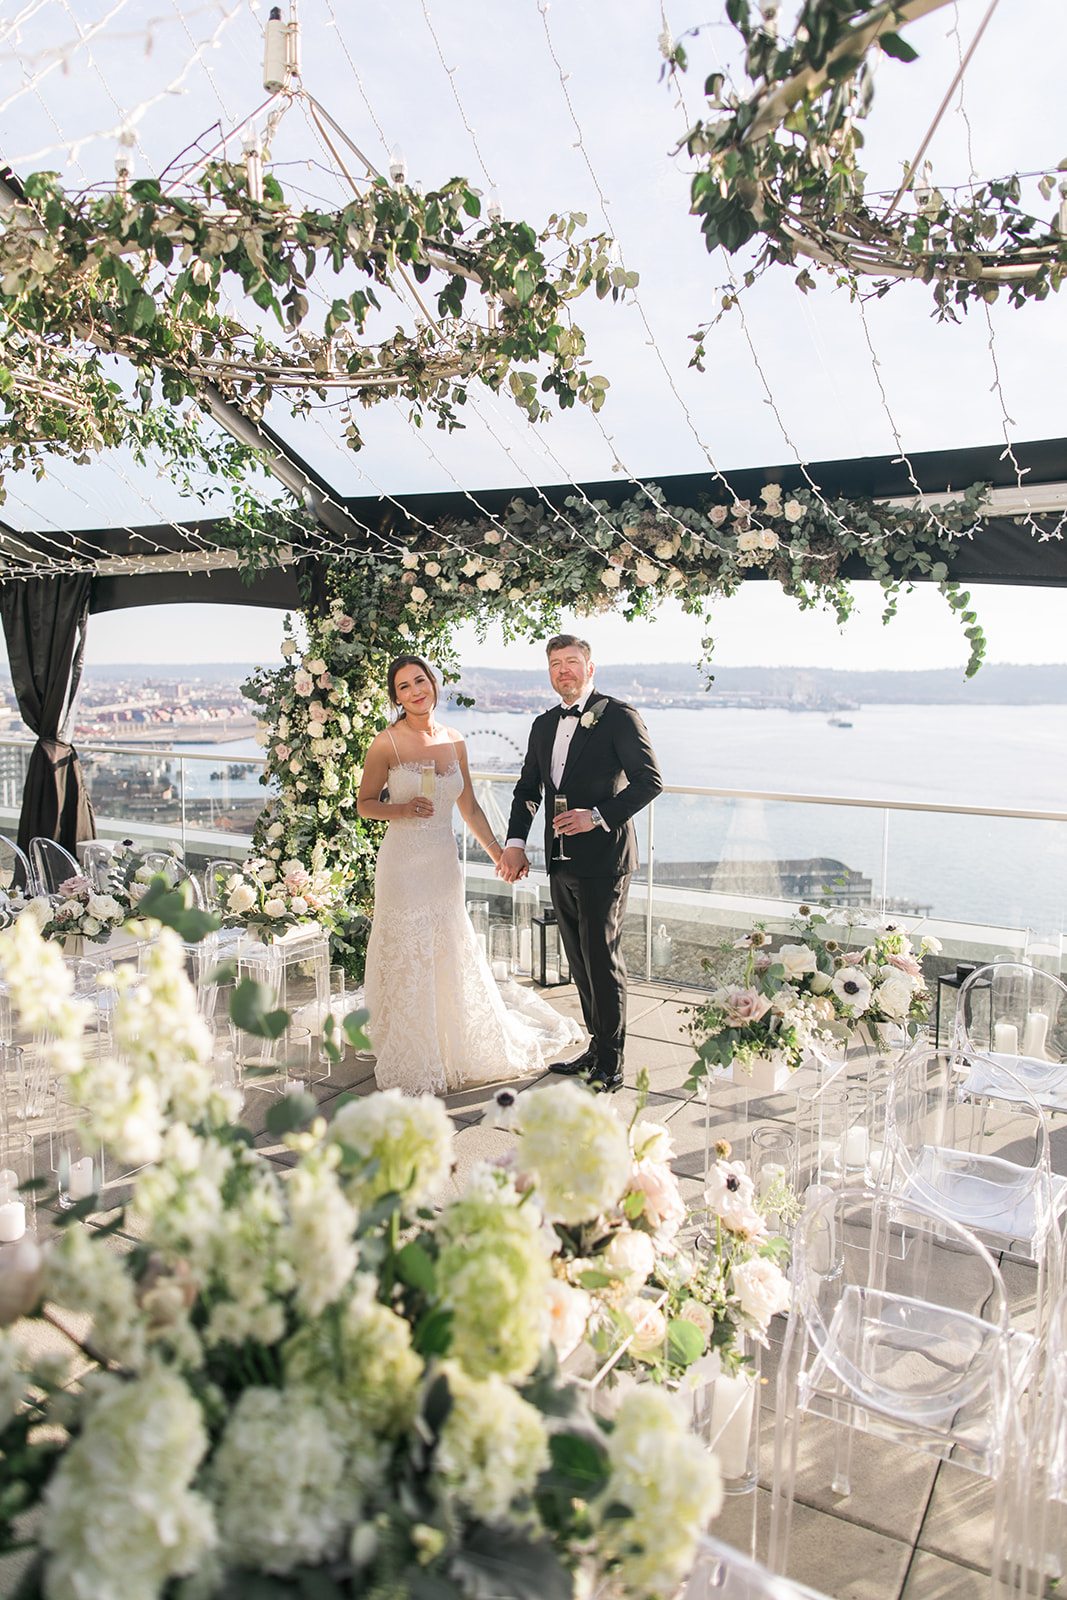 Bride and groom surrounded by white flowers and greenery on the rooftop of the Thompson Hotel Seattle with view of the Puget Sound